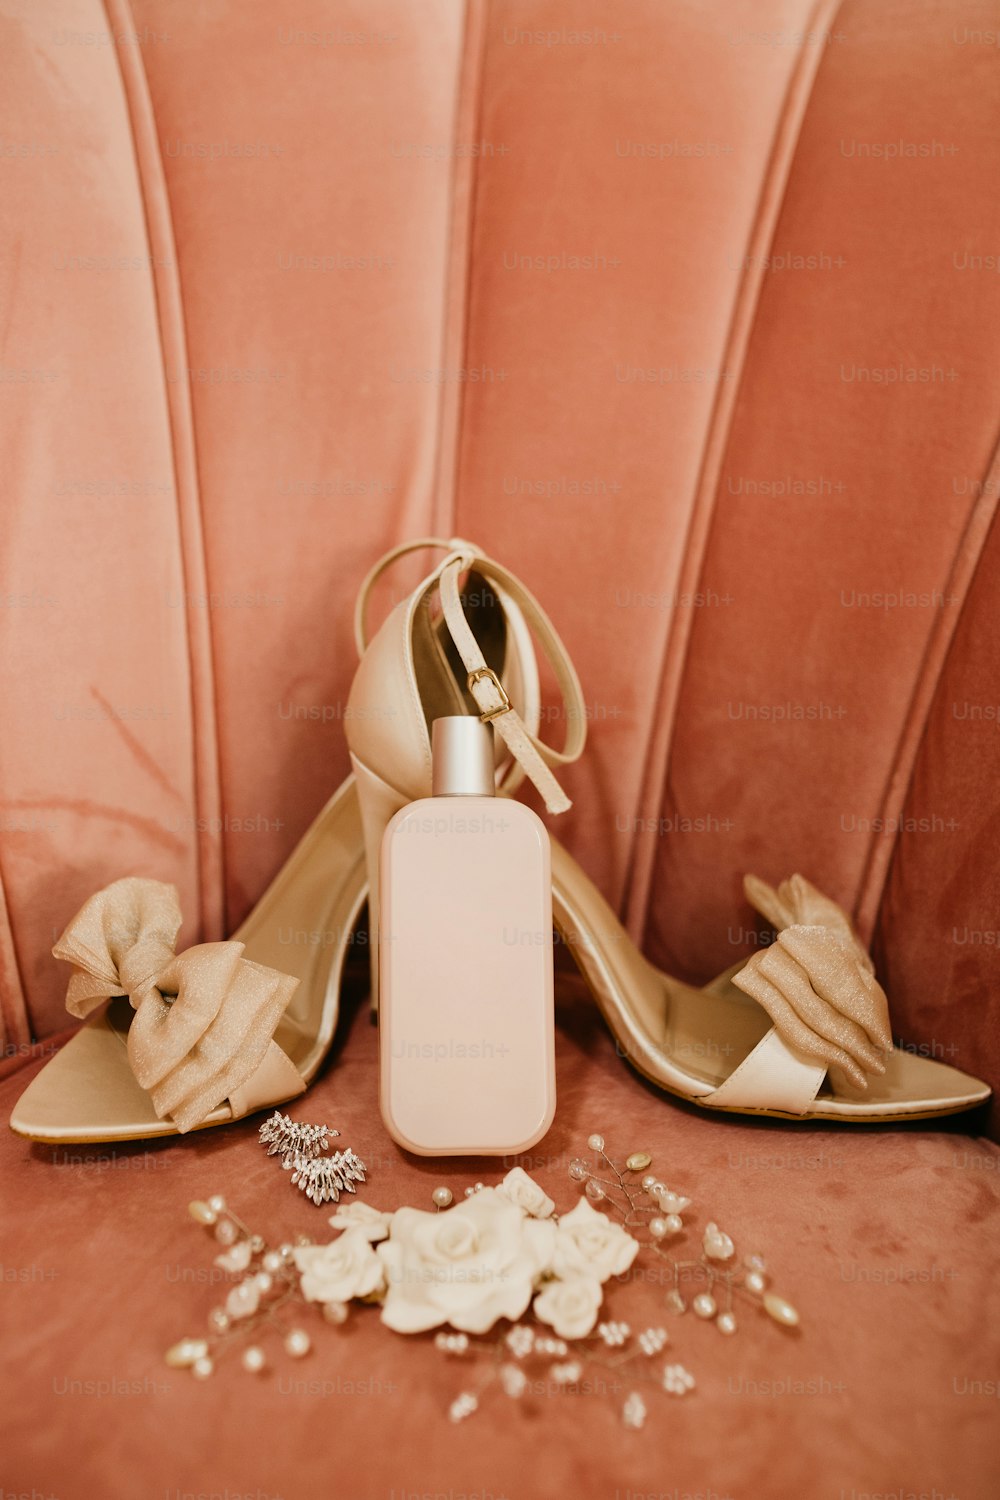 a pair of high heeled shoes next to a bottle of perfume